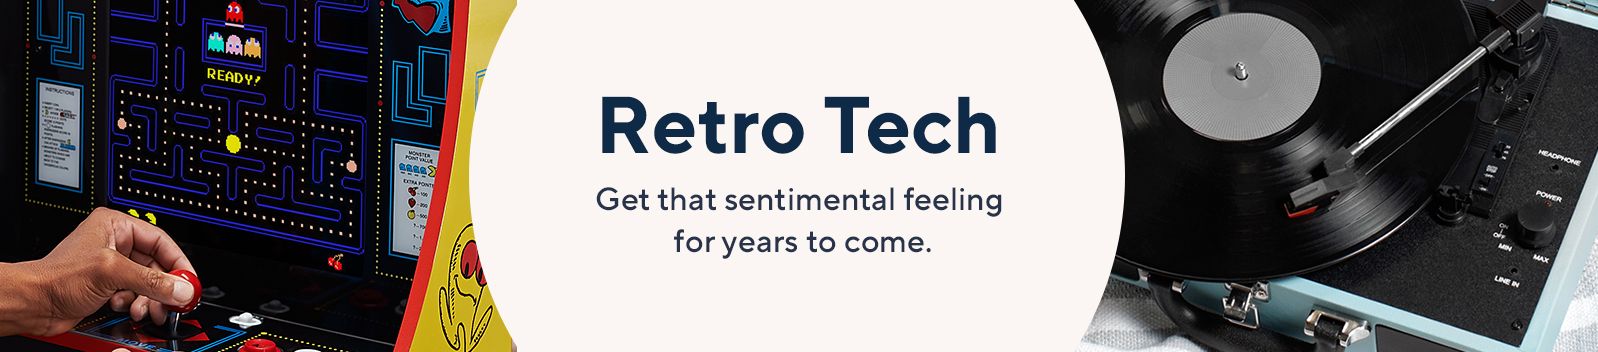 Retro Tech - Get that sentimental feeling for years to come.